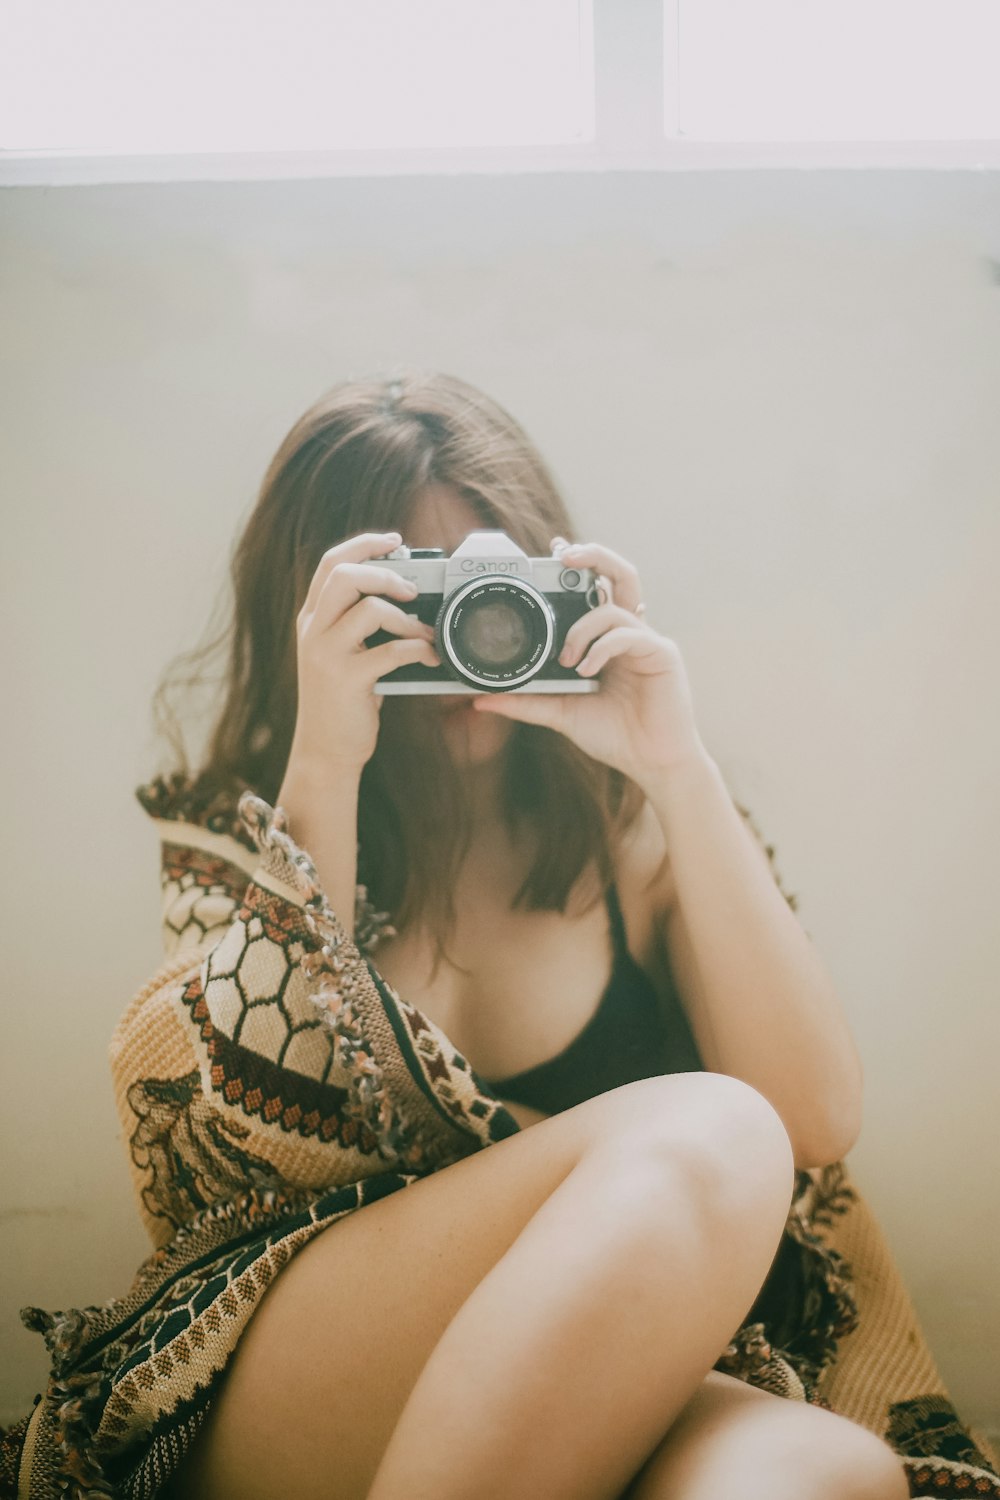 woman in black and white floral bikini top holding black and silver dslr camera